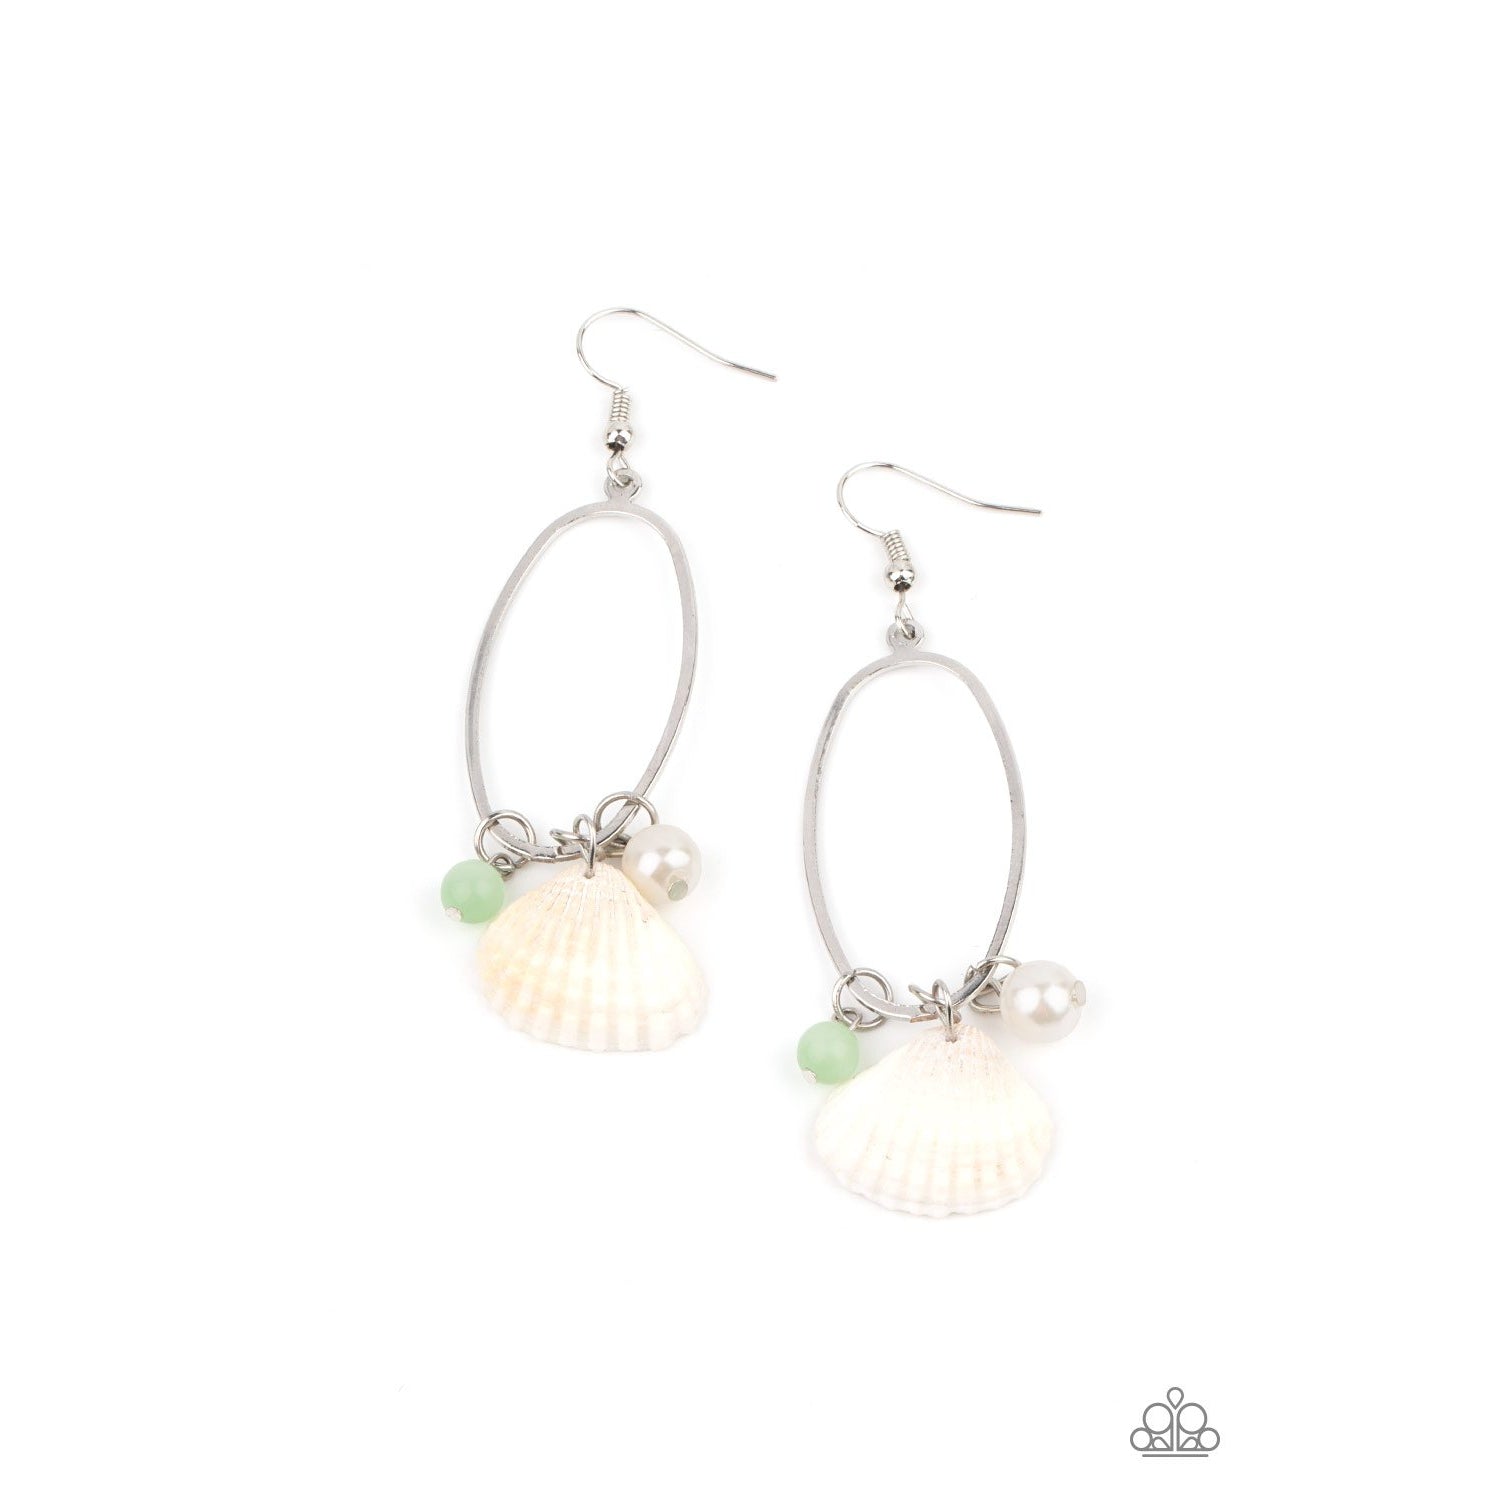 This Too SHELL Pass - Green Ash Cat's Eye Earrings - Paparazzi Accessories - GlaMarous Titi Jewels